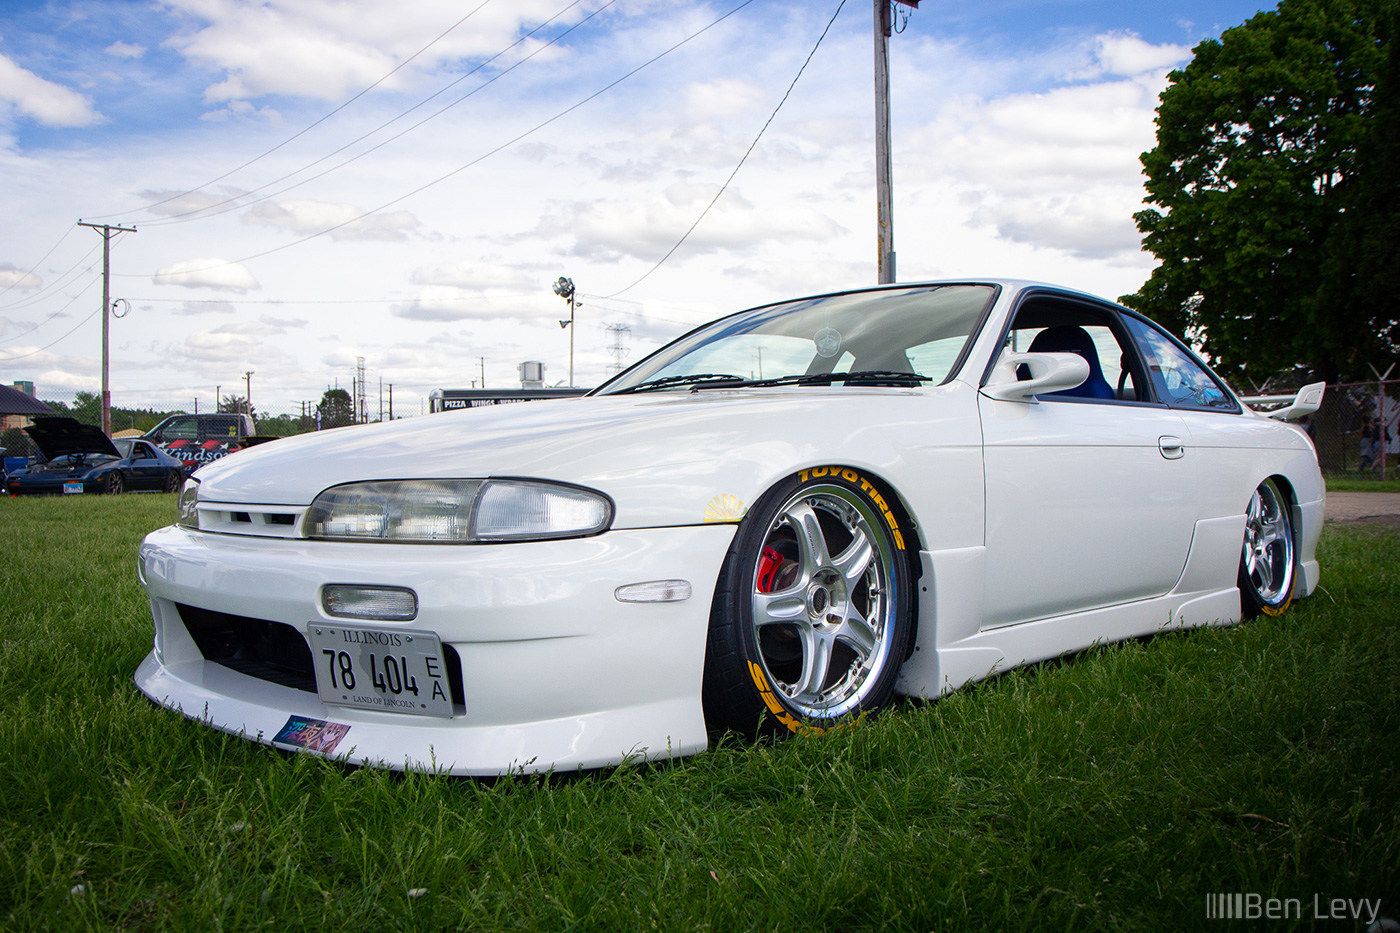 White S14 Nissan Silvia at Import Face-Off